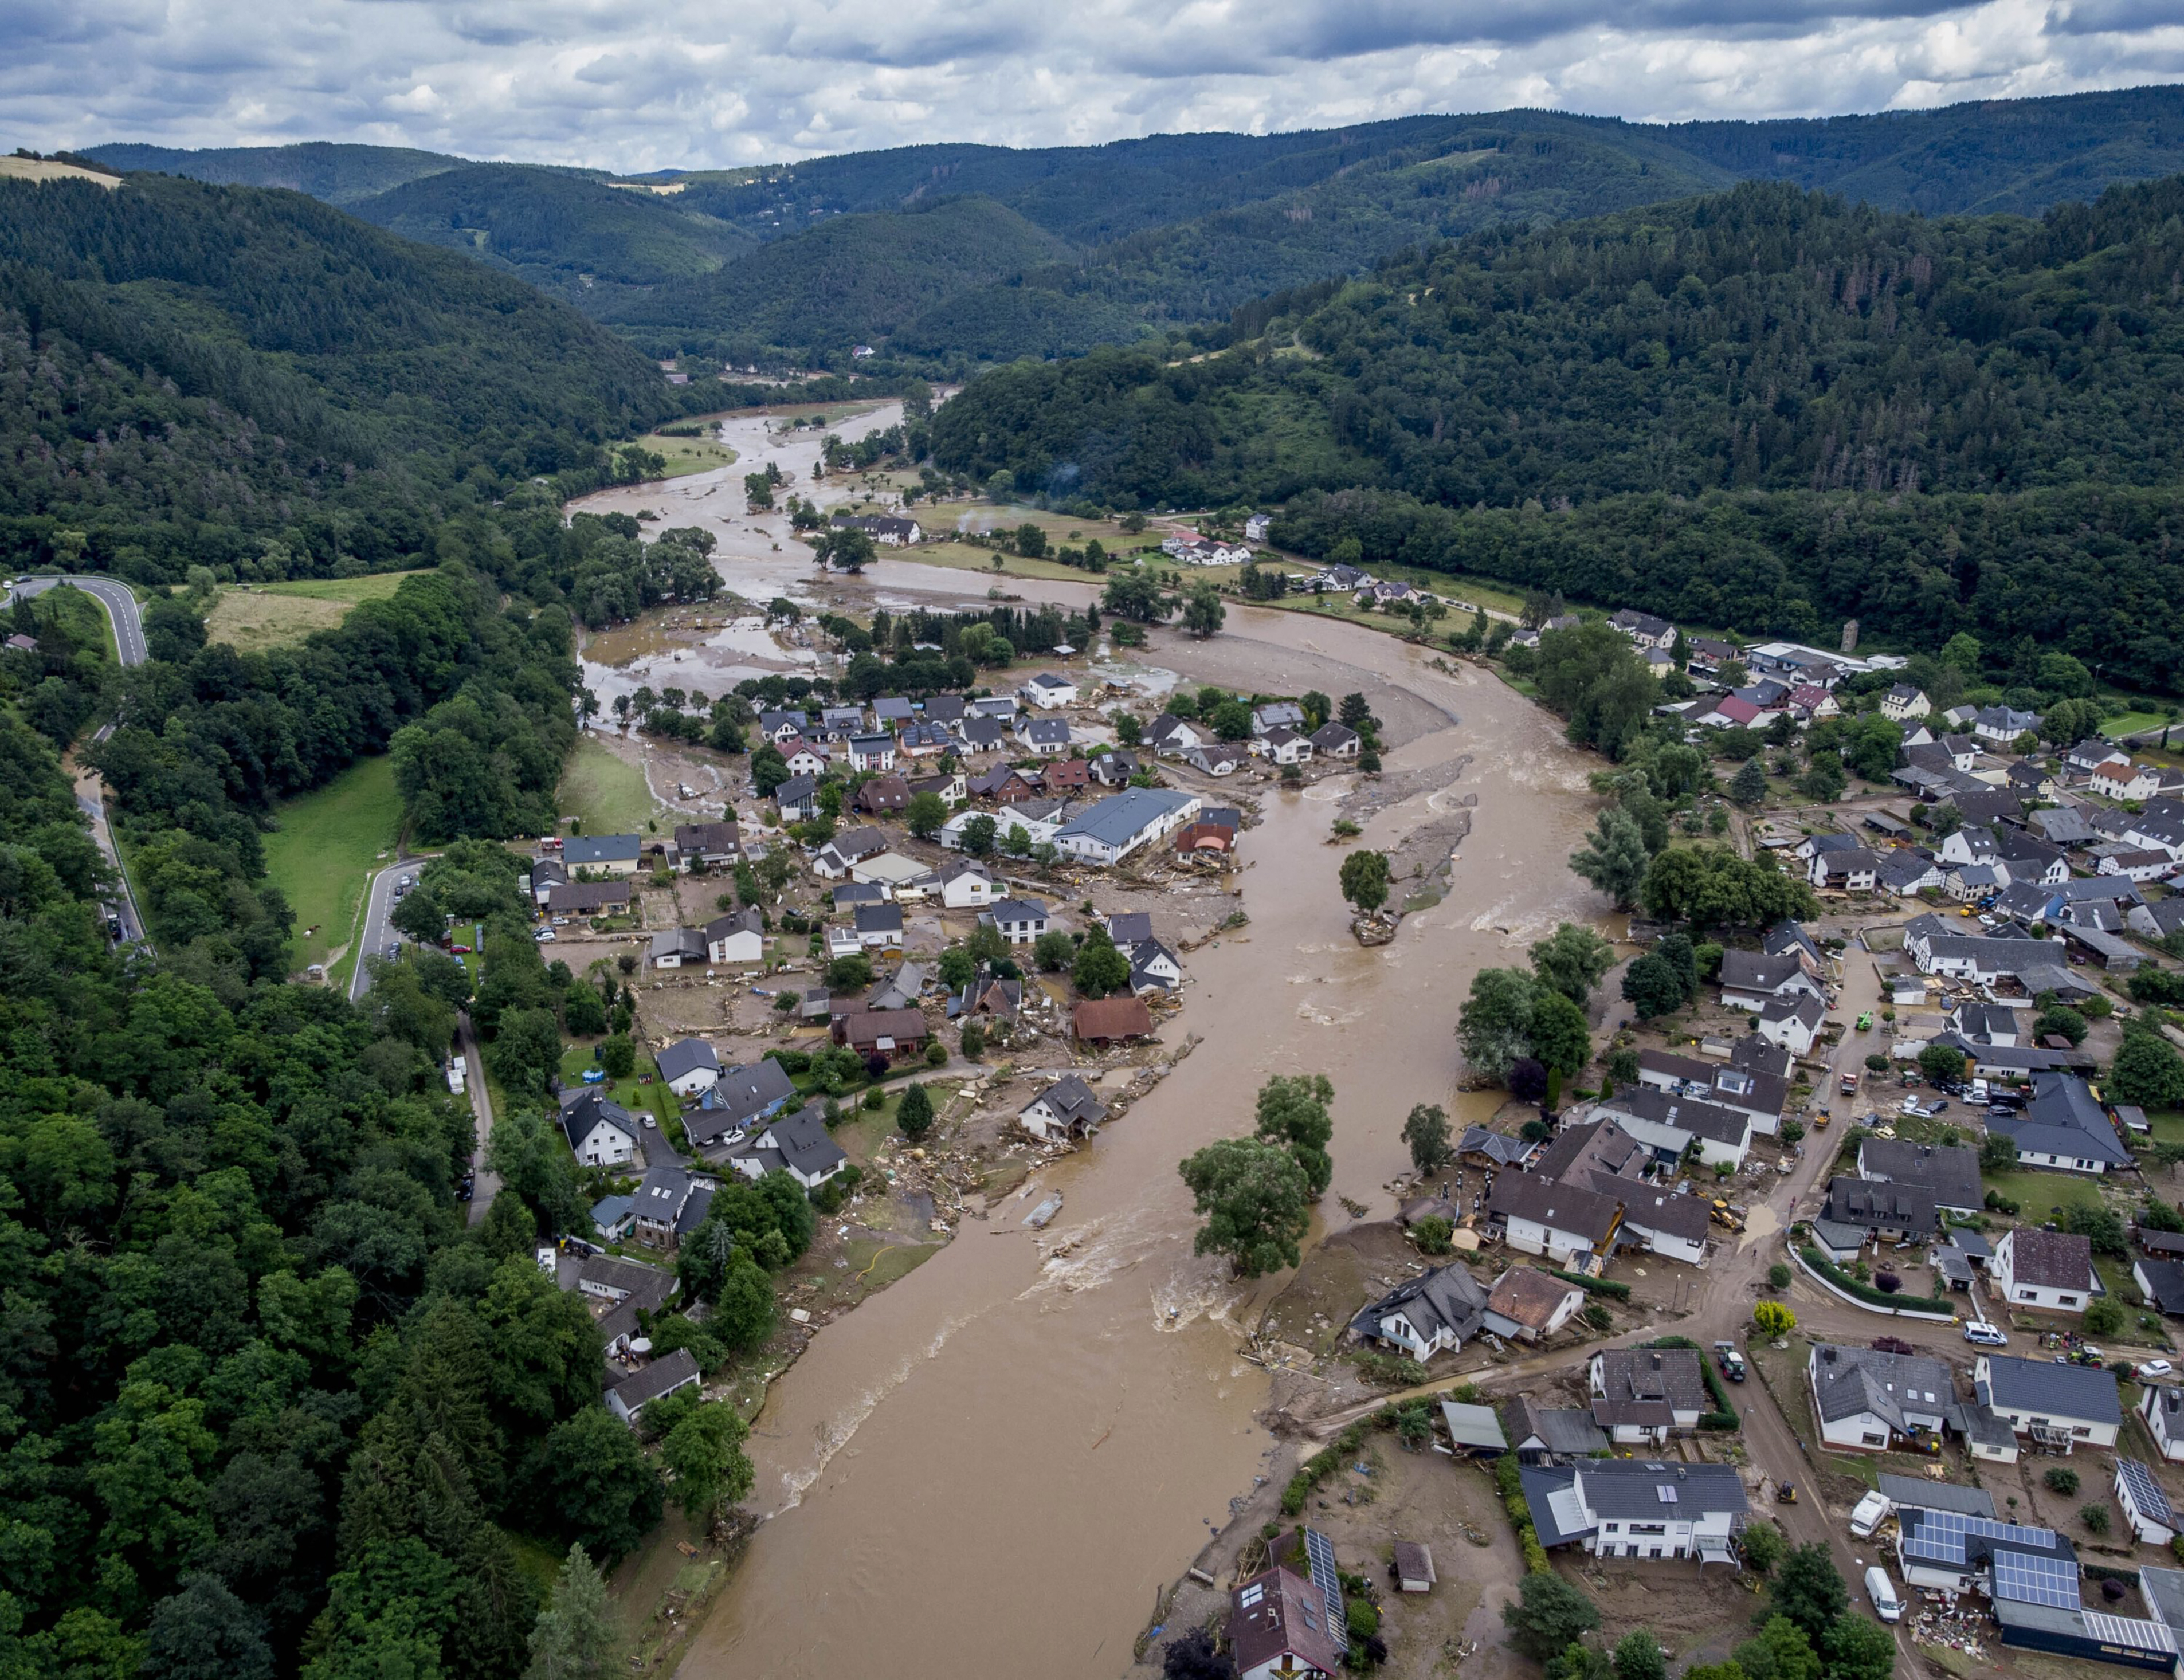 The Ahr river flows past houses destroyed by floods in Insul, Germany, July 15, 2021